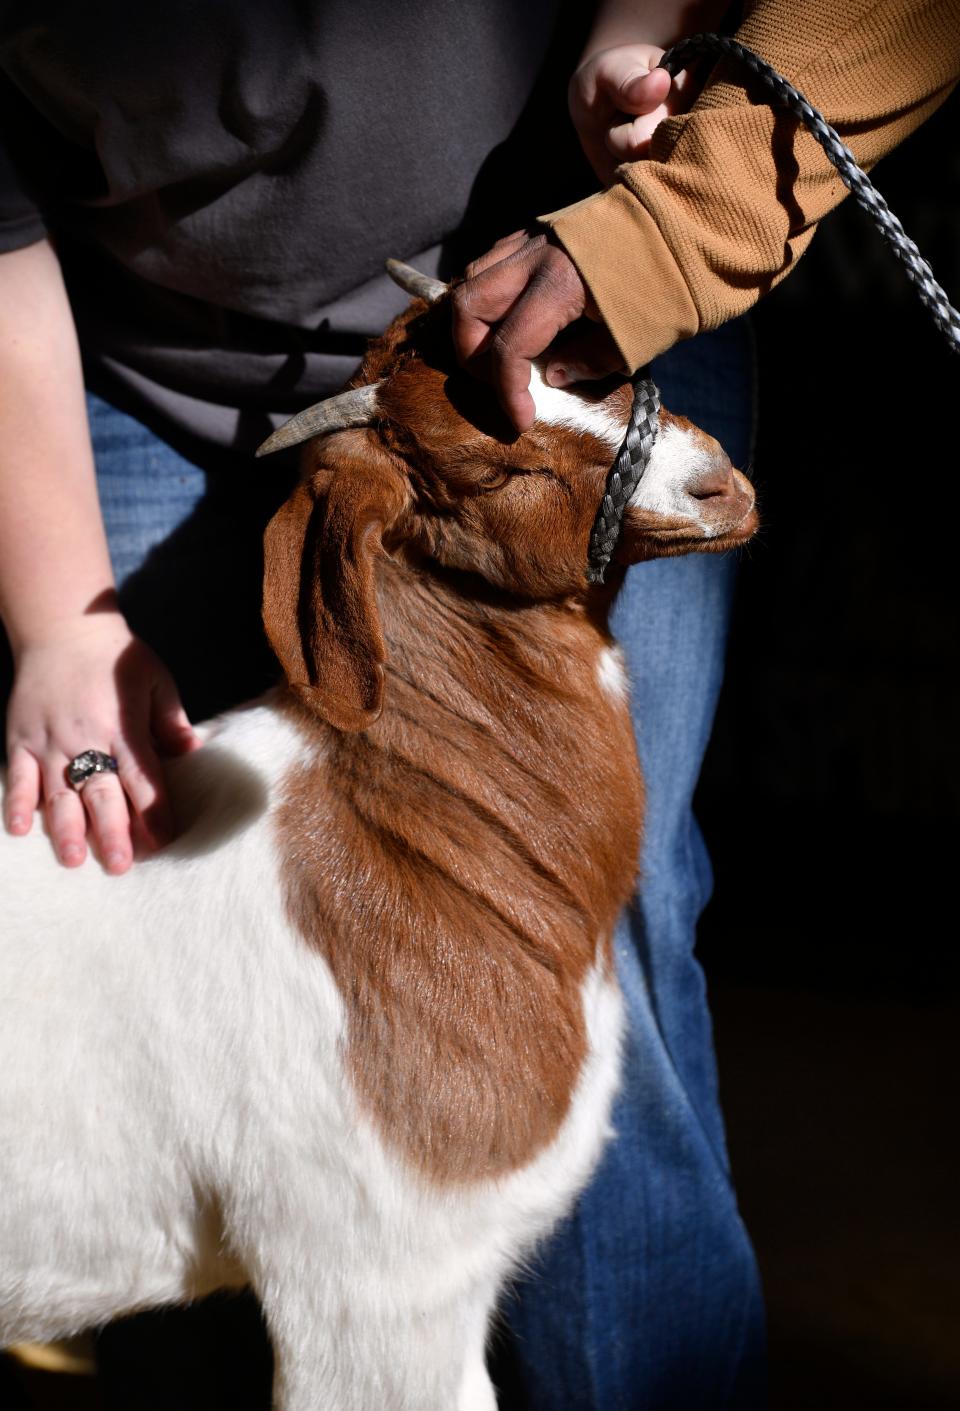 Angel Esparza gives a goat a friendly scratch on the head during the Scurry County Junior Livestock Show in Snyder Jan. 18.